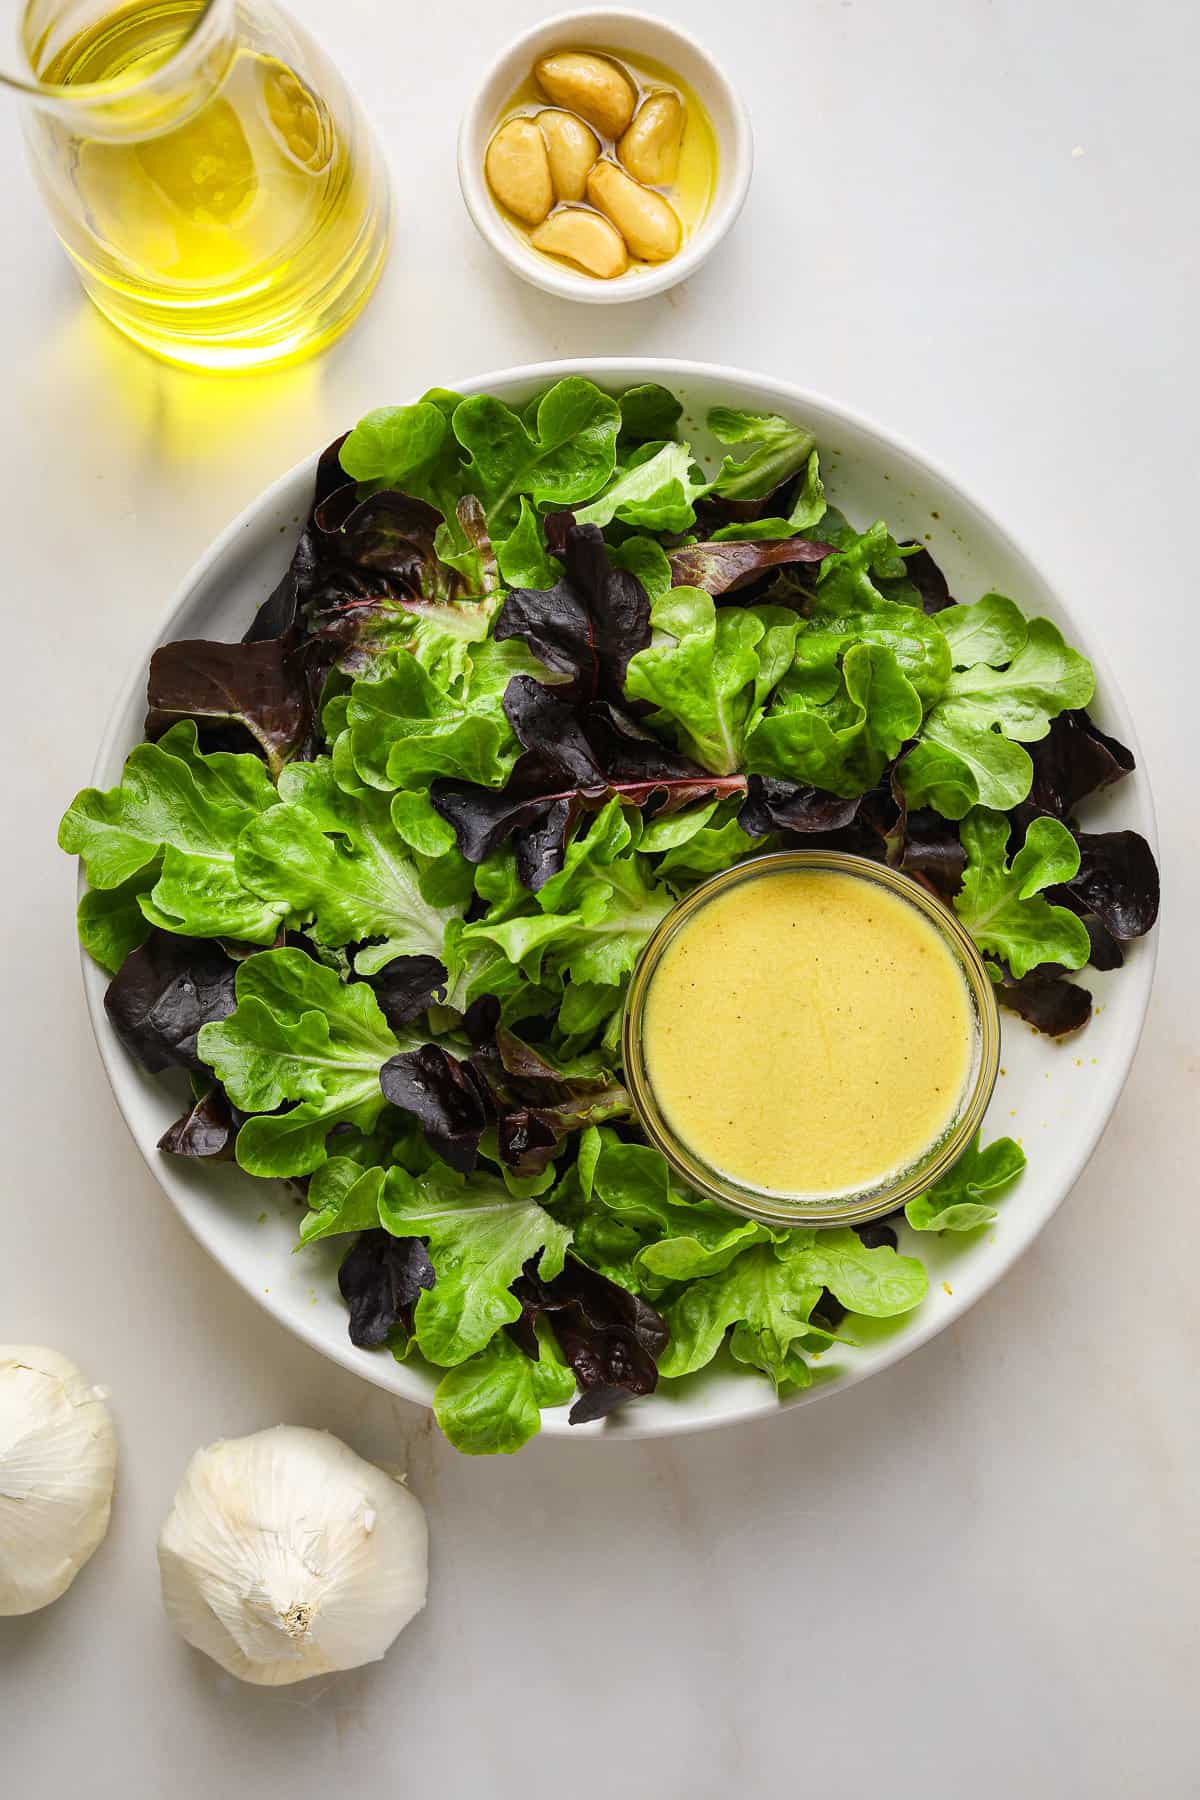 A bowl of lettuce with a small dish of creamy pale yellow salad dressing.